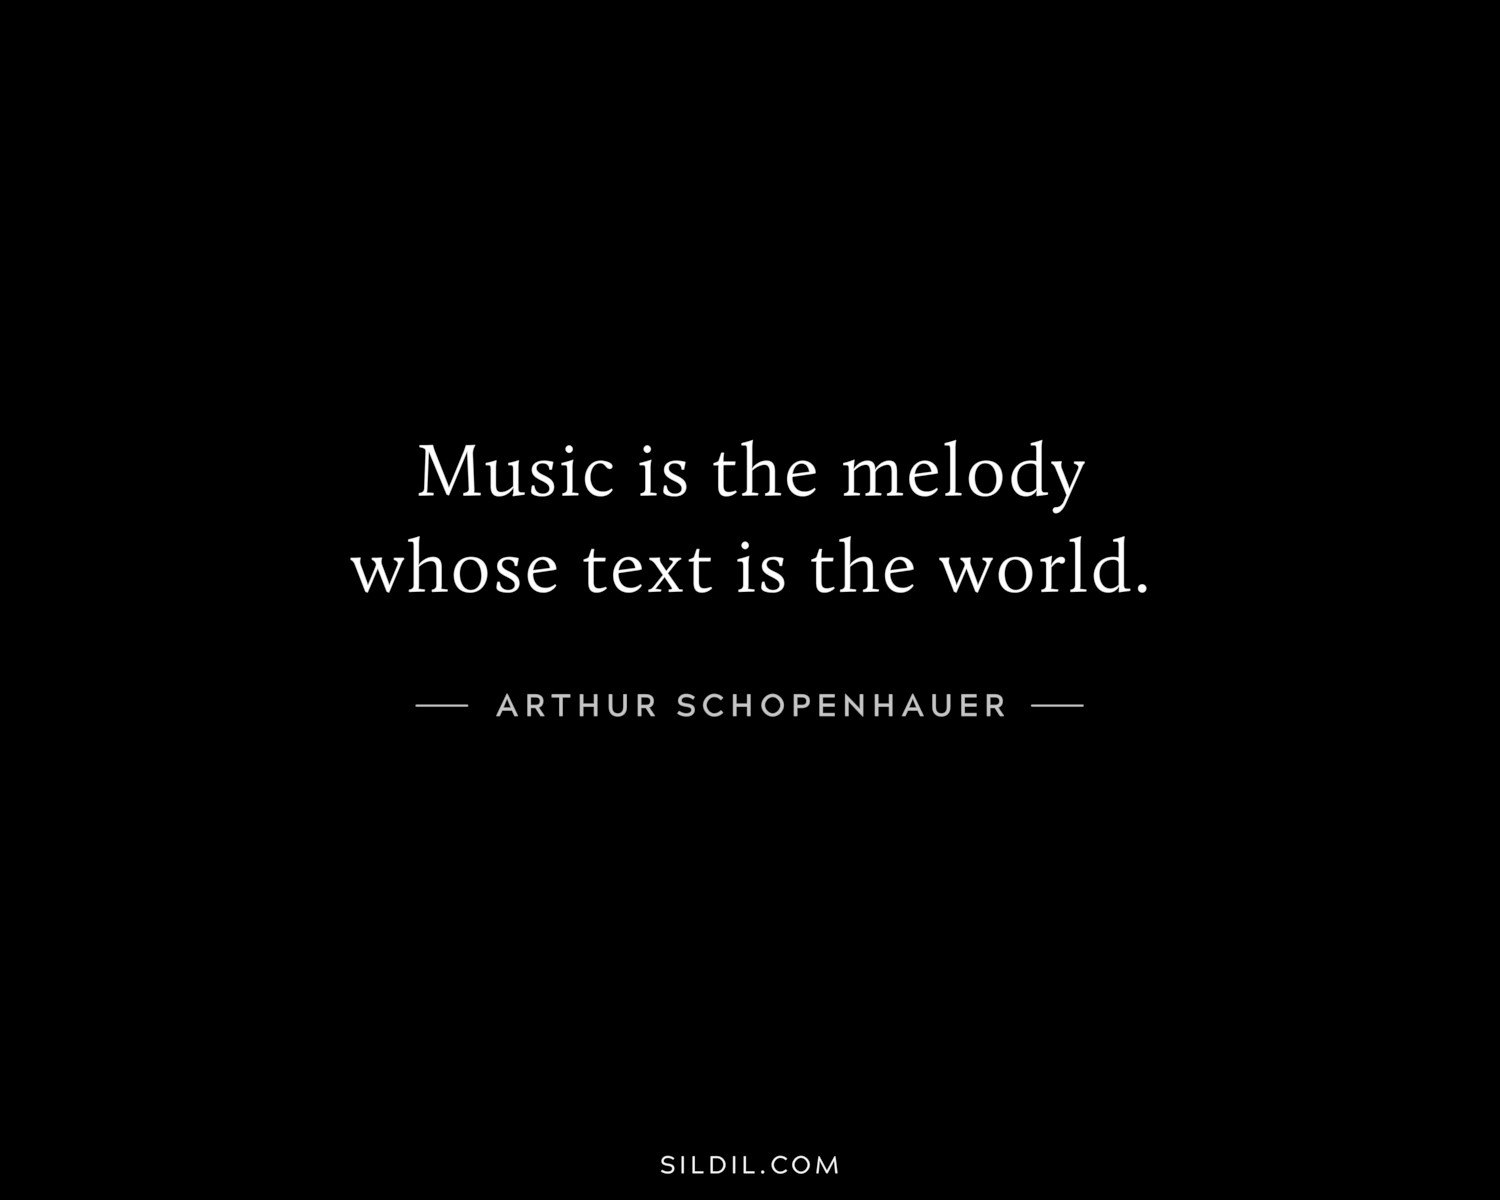 Music is the melody whose text is the world.